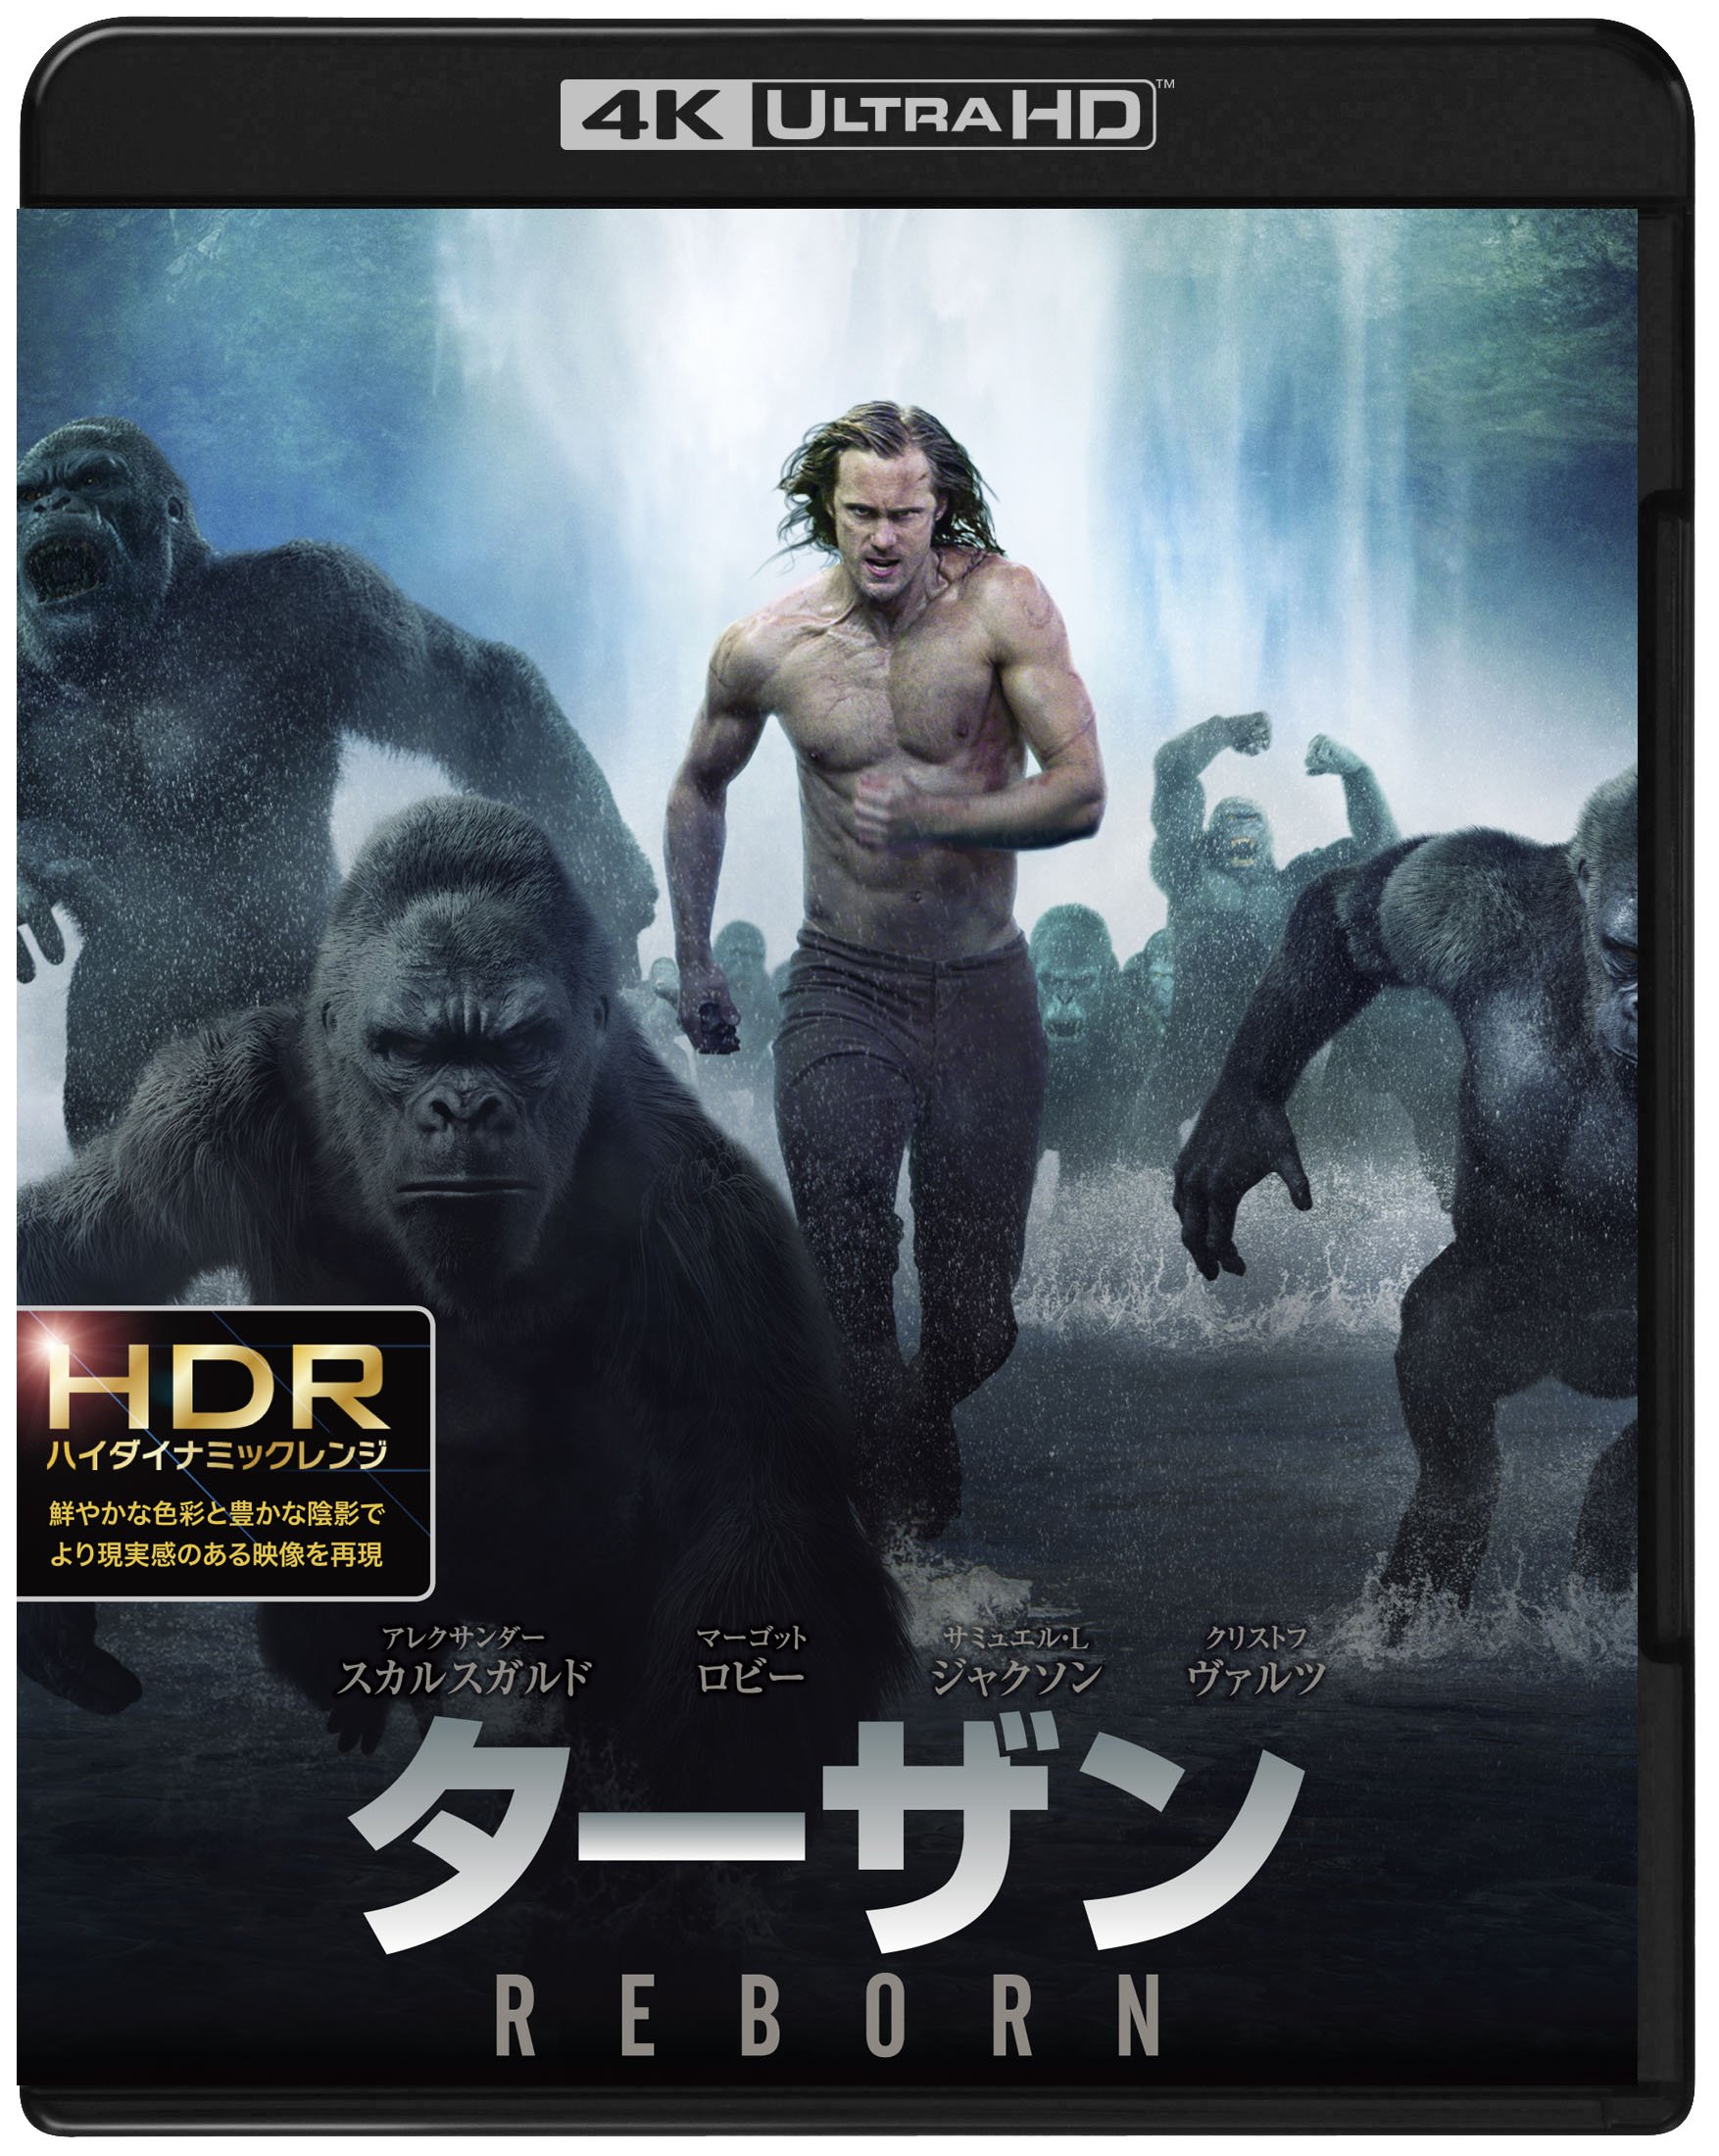 ^[U:REBORN &lt;4K ULTRA HD&amp;3D&amp;2Du[CZbg&gt;(dl/3g/fW^Rs[t) [Blu-ray]